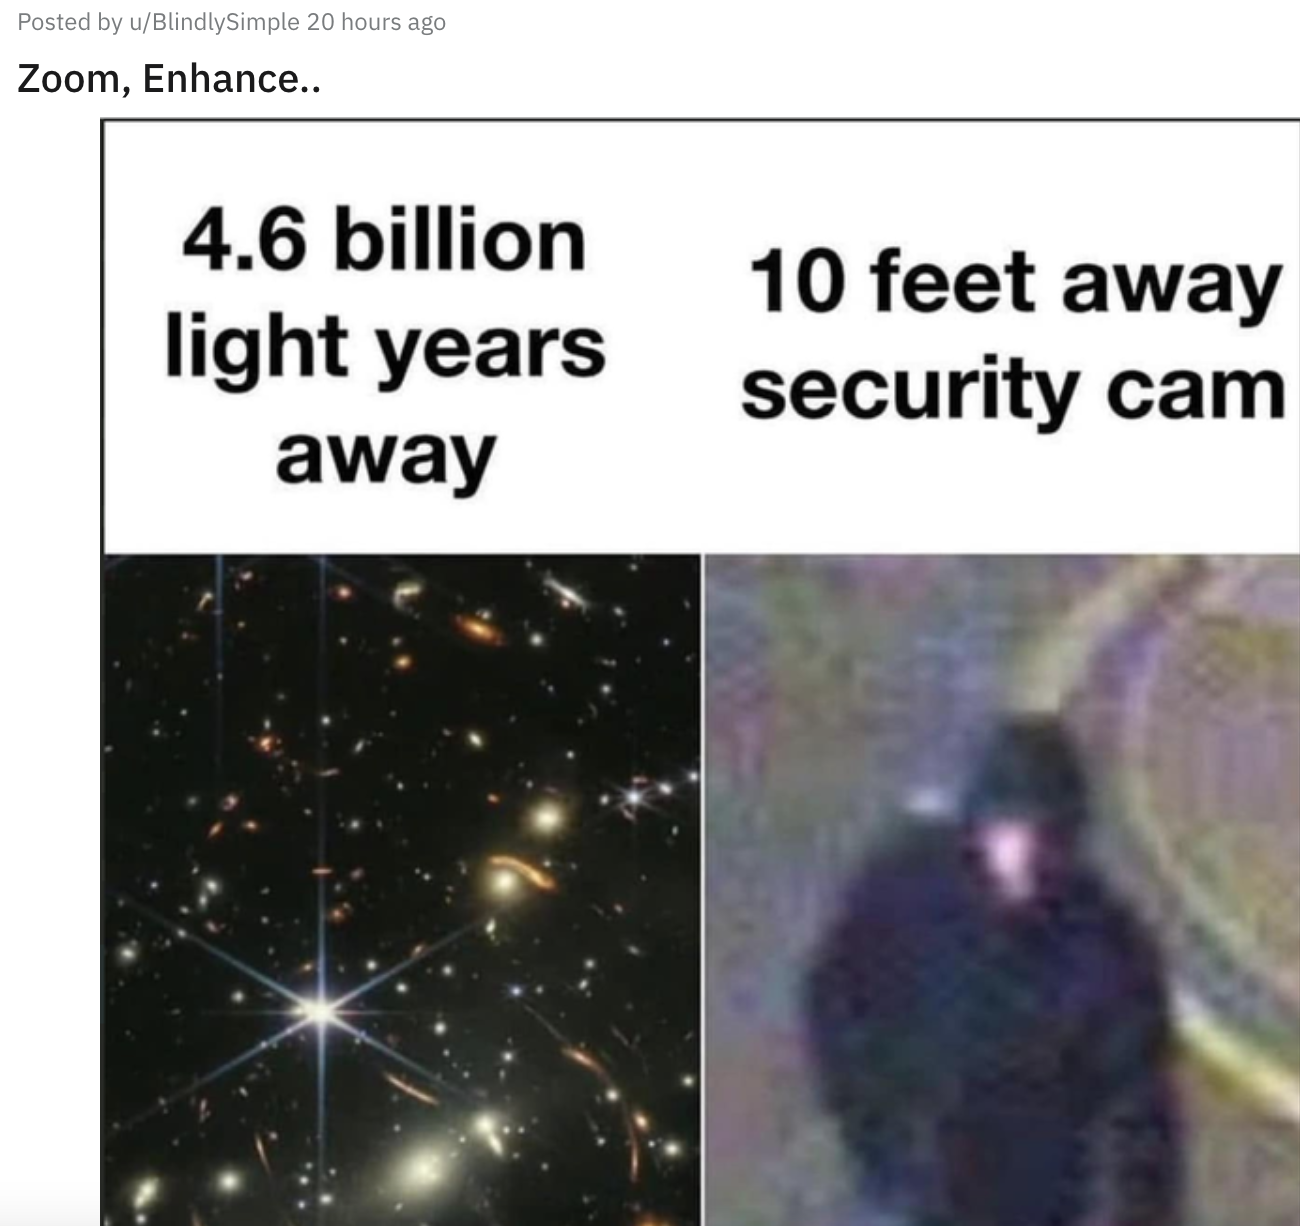 James Webb Telescope Memes - security cameras be like have you seen - Posted by uBlindlySimple 20 hours ago Zoom, Enhance.. 4.6 billion light years away 10 feet away security cam